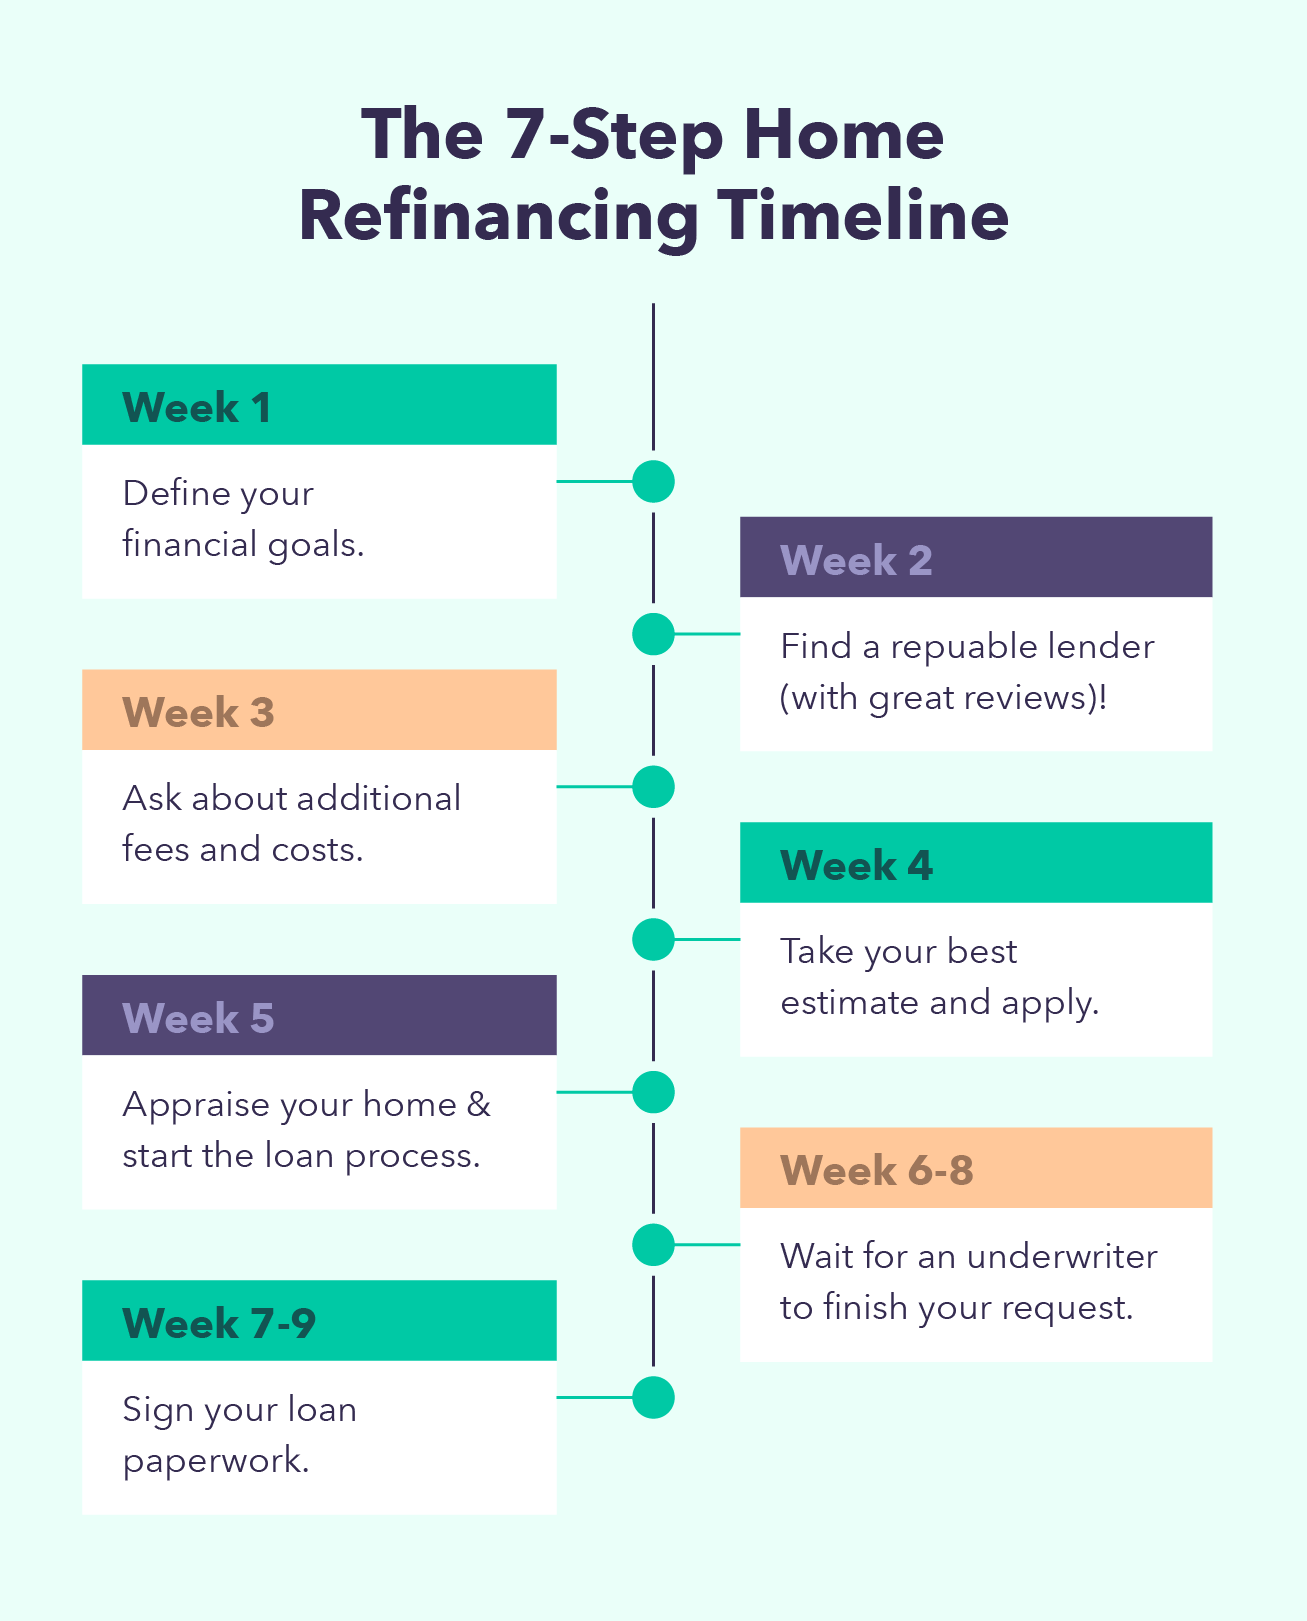 How Long Does It Take to Refinance a House in 2022? - MintLife Blog